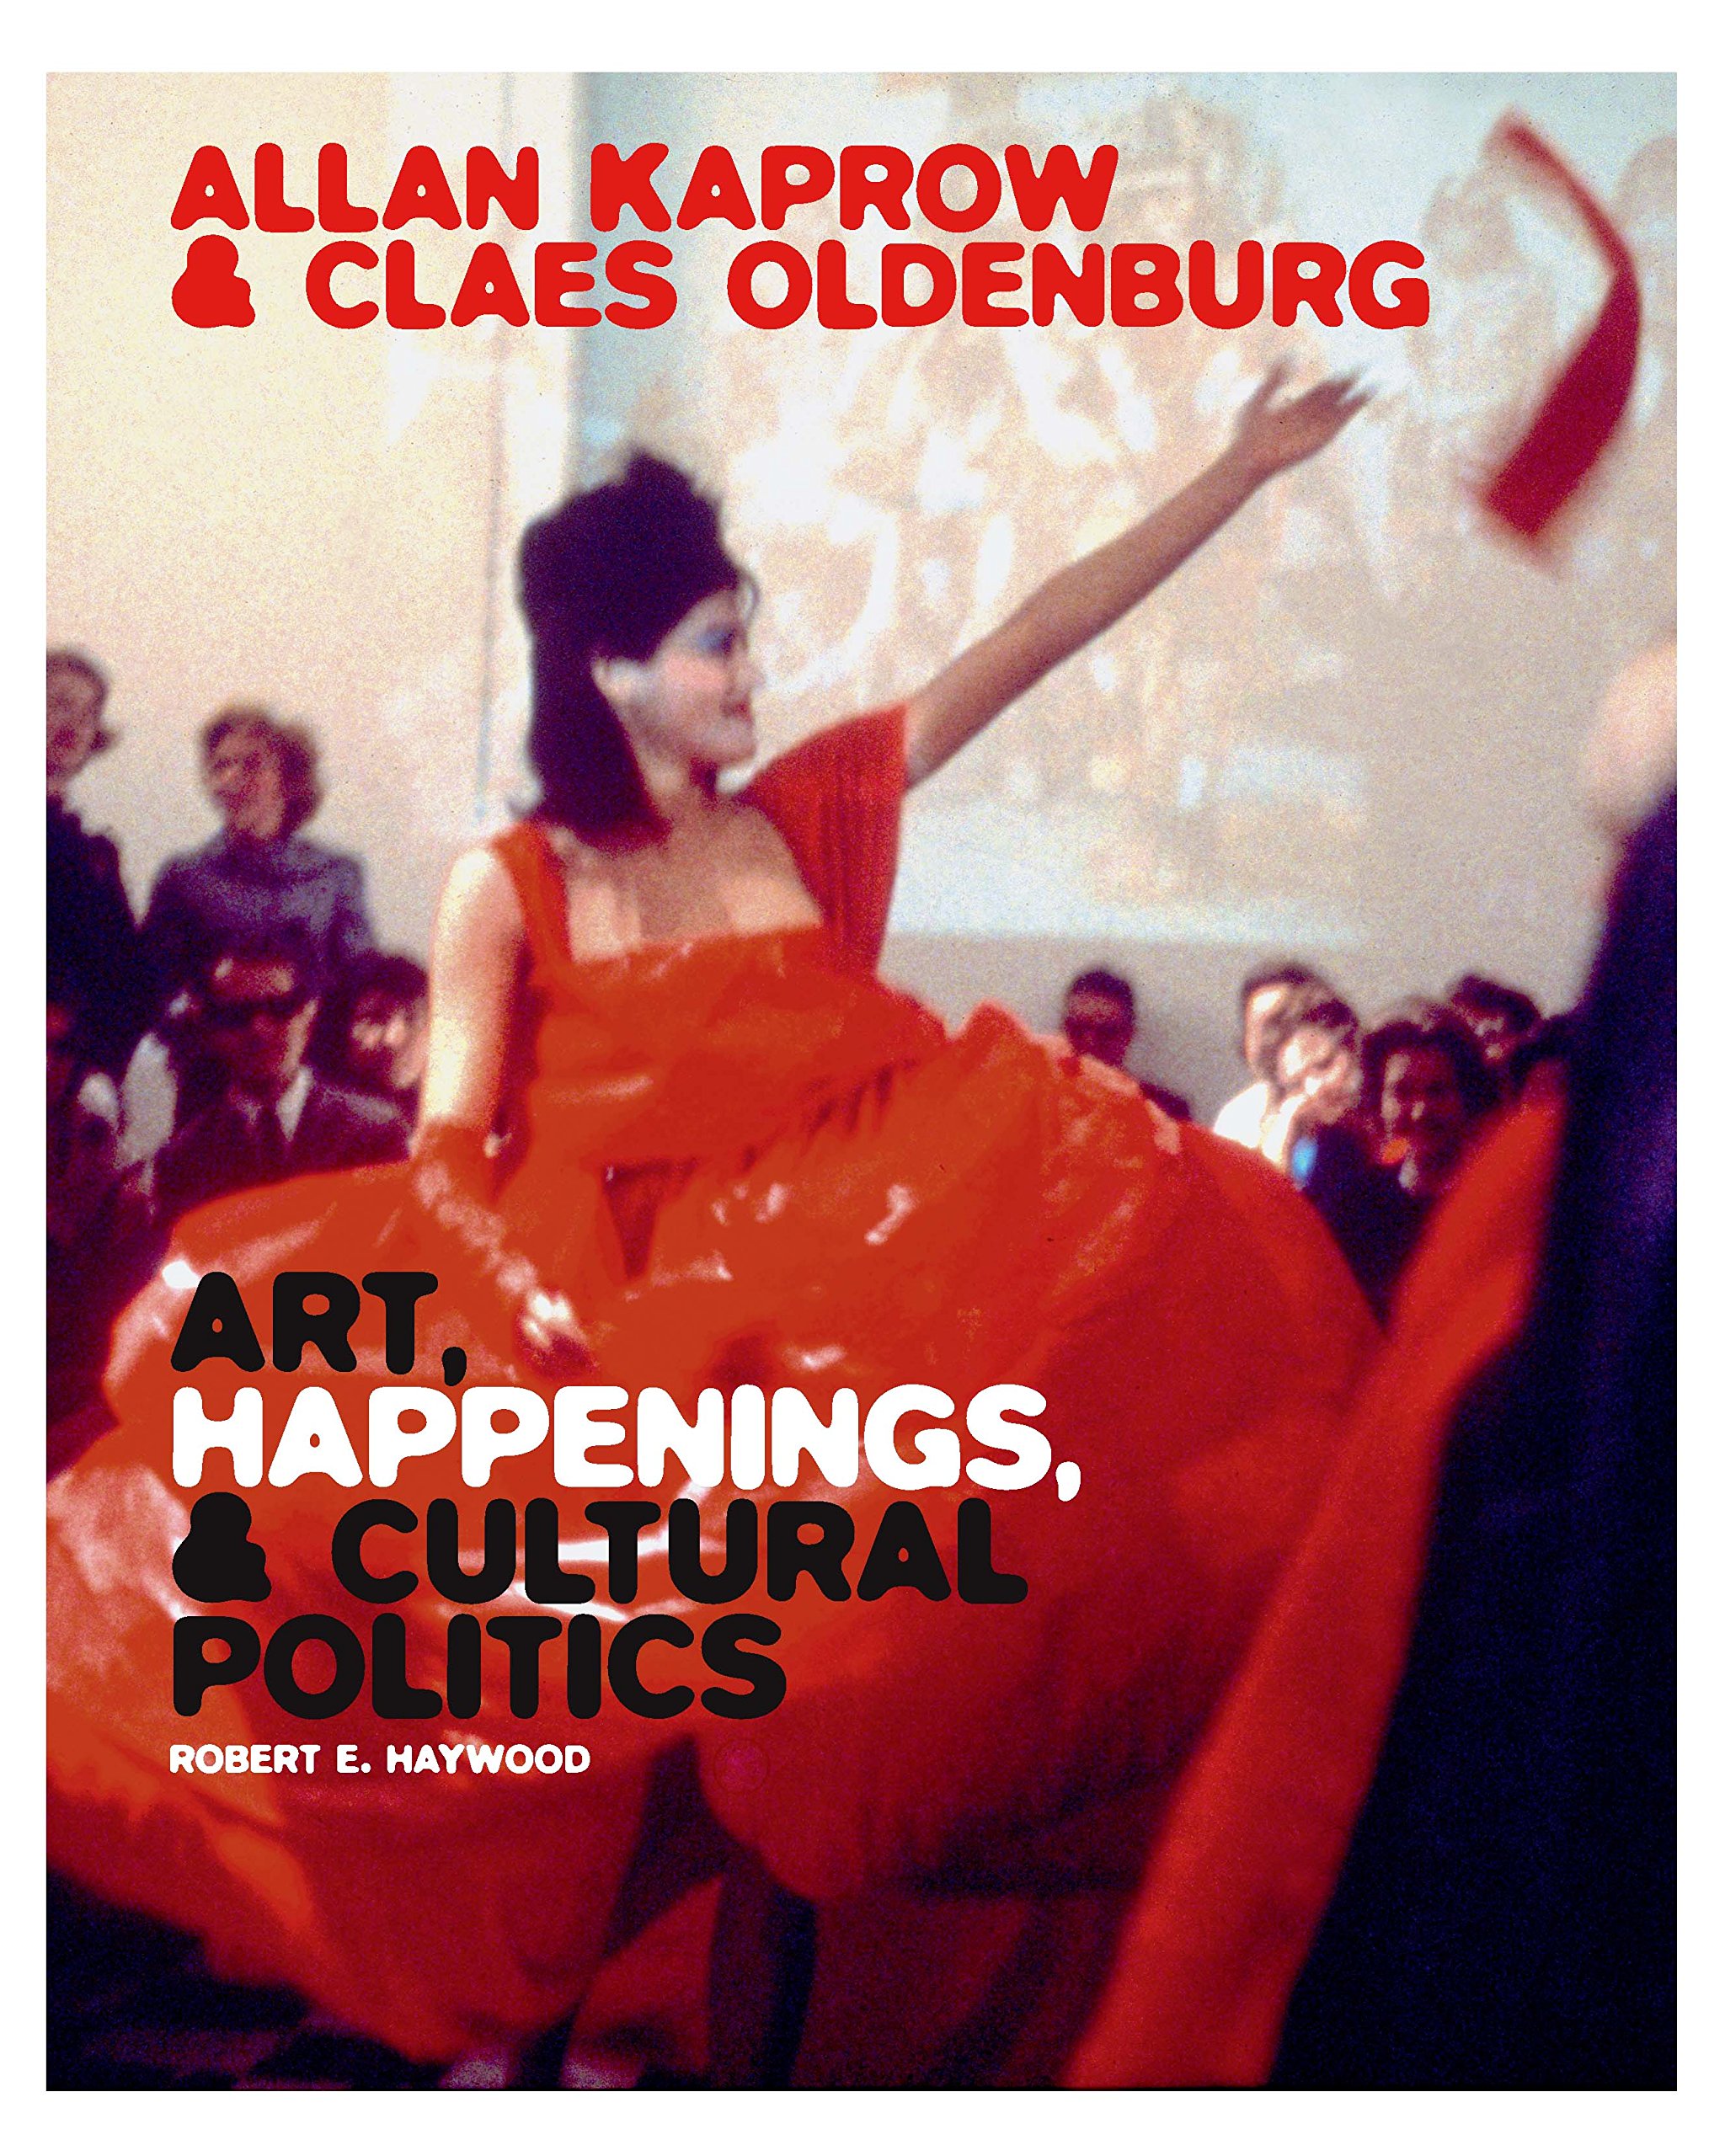 Robert E. Haywood, Allan Kaprow and Claes Oldenburg: Art, Happenings, and Cultural Politics (New Haven and London:  Yale University Press, 2017)